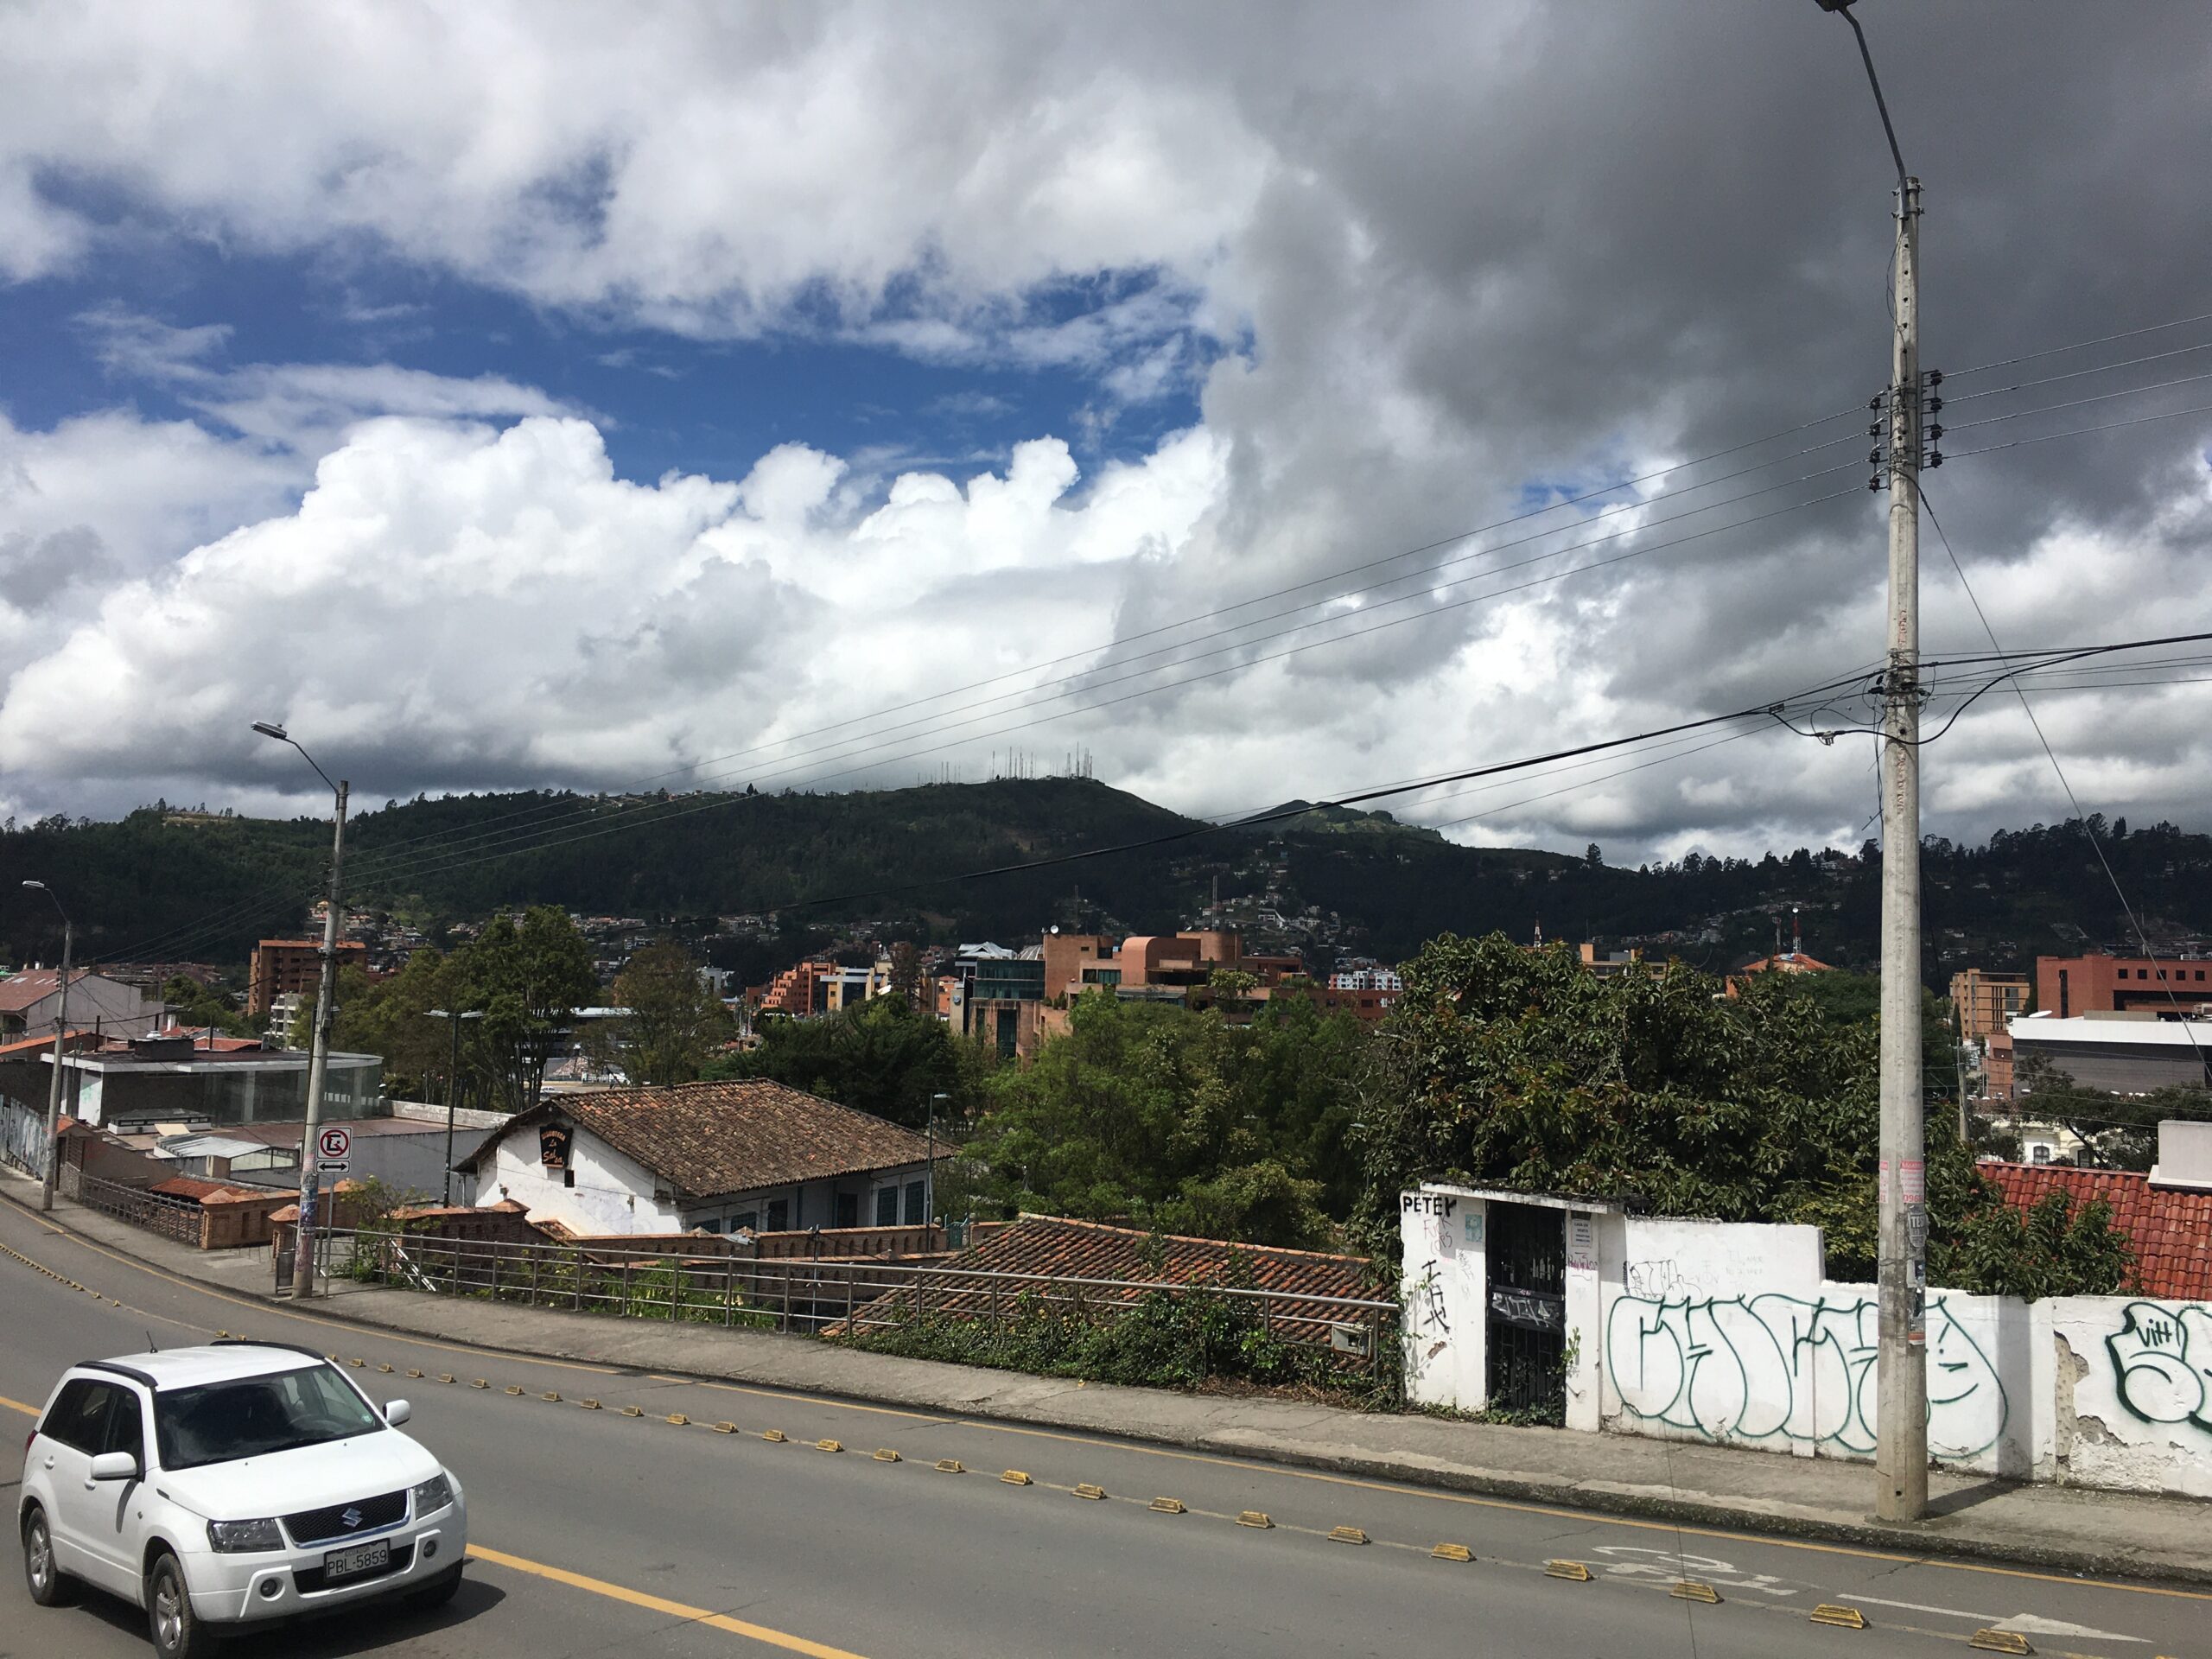 Pictured is part of the city of Cuenca. Present in the picture is a road, which is surrounded by hills and greenery, topped with a cloudy, but somewhat blue, sky. 